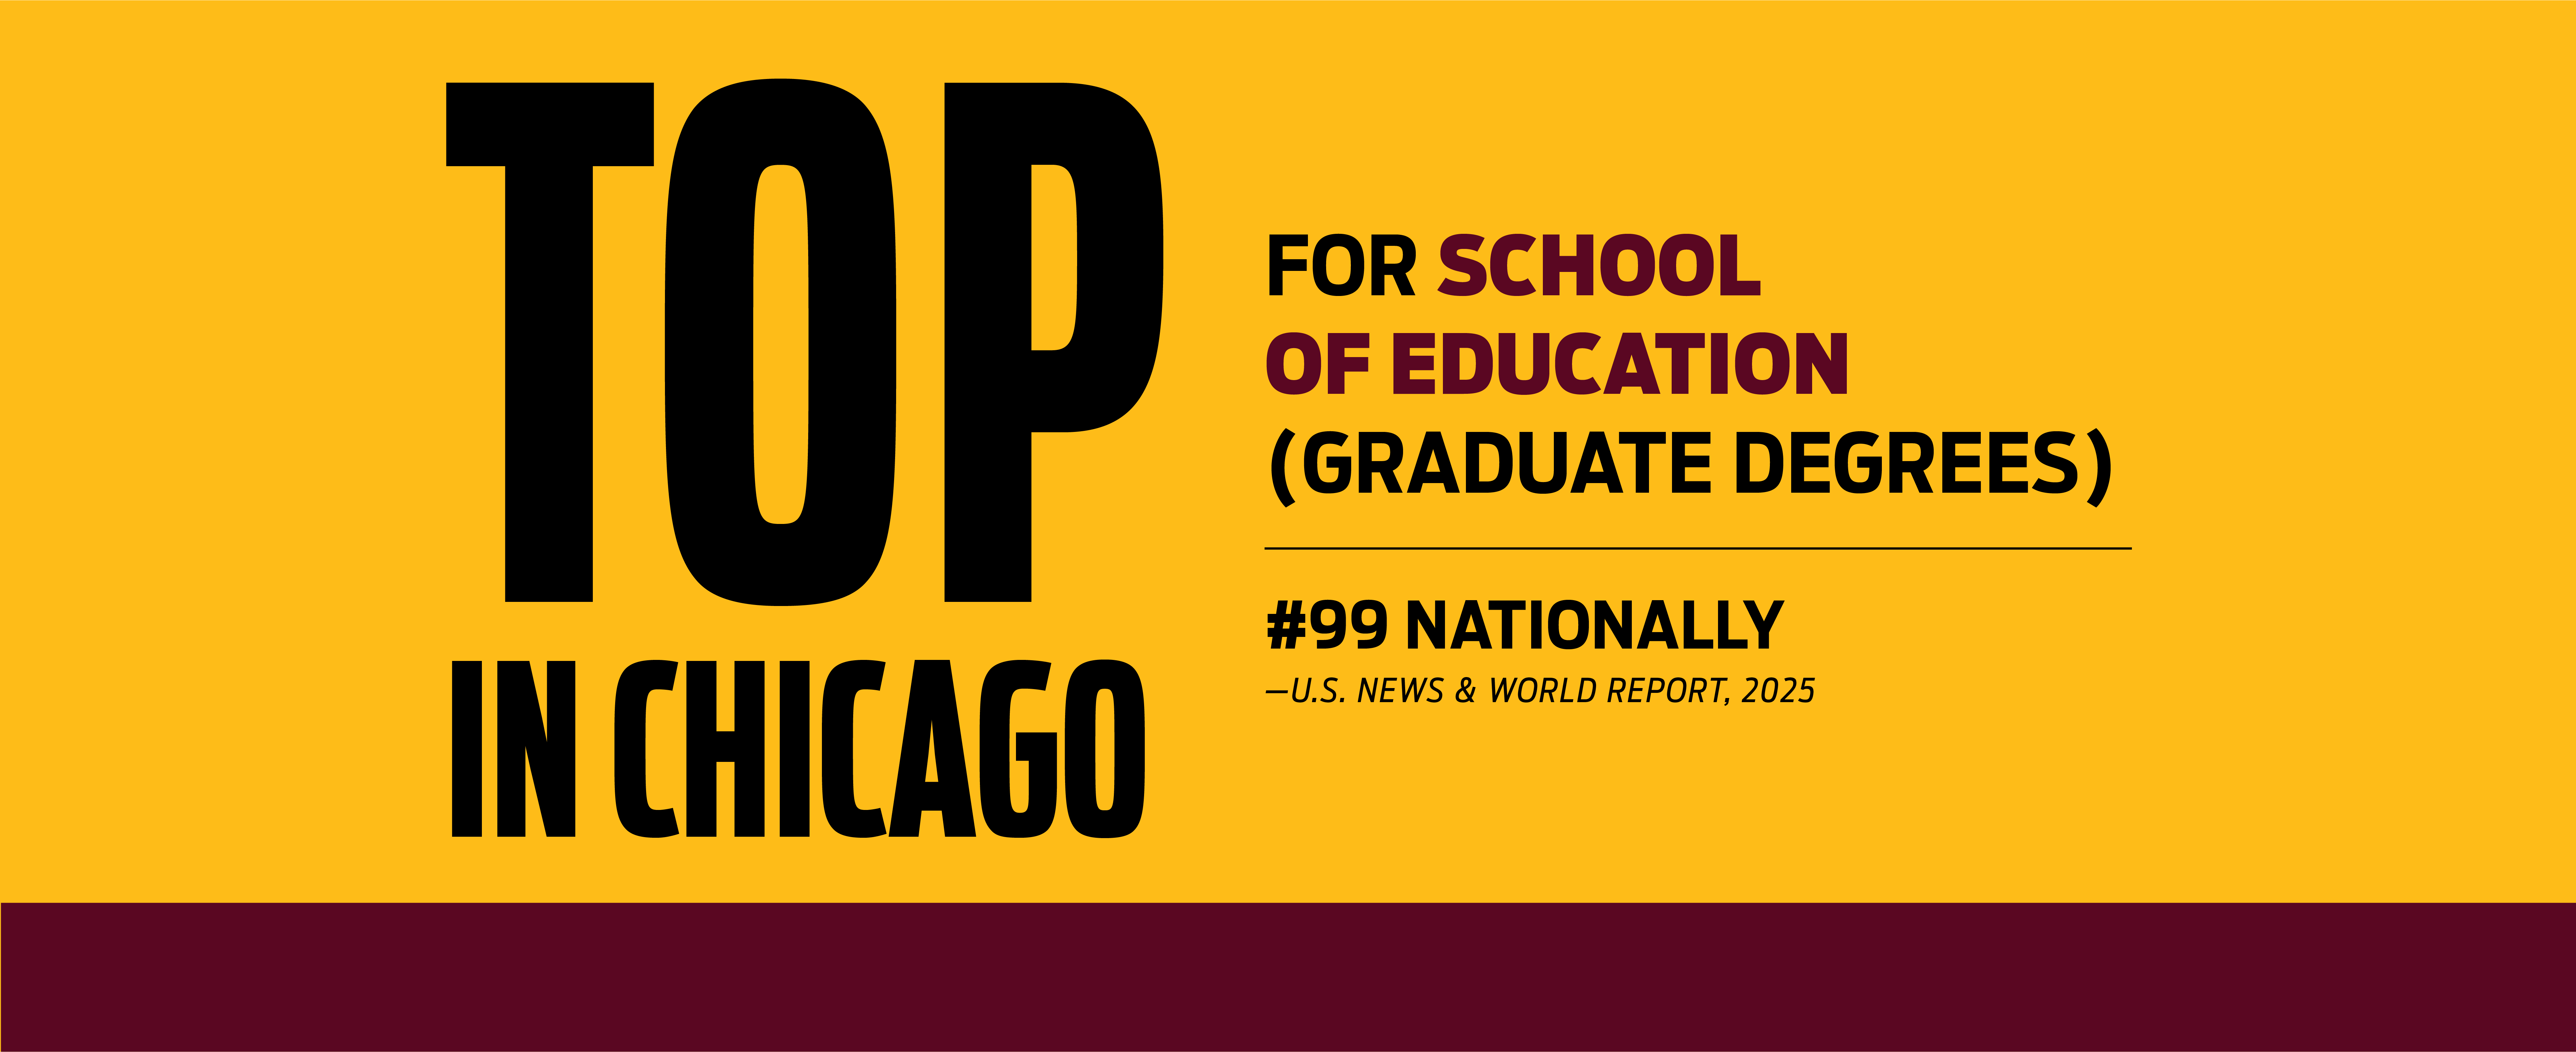 Loyola University Chicago's School of Education Surges to Top 3 In Chicago for Graduate Schools in Education